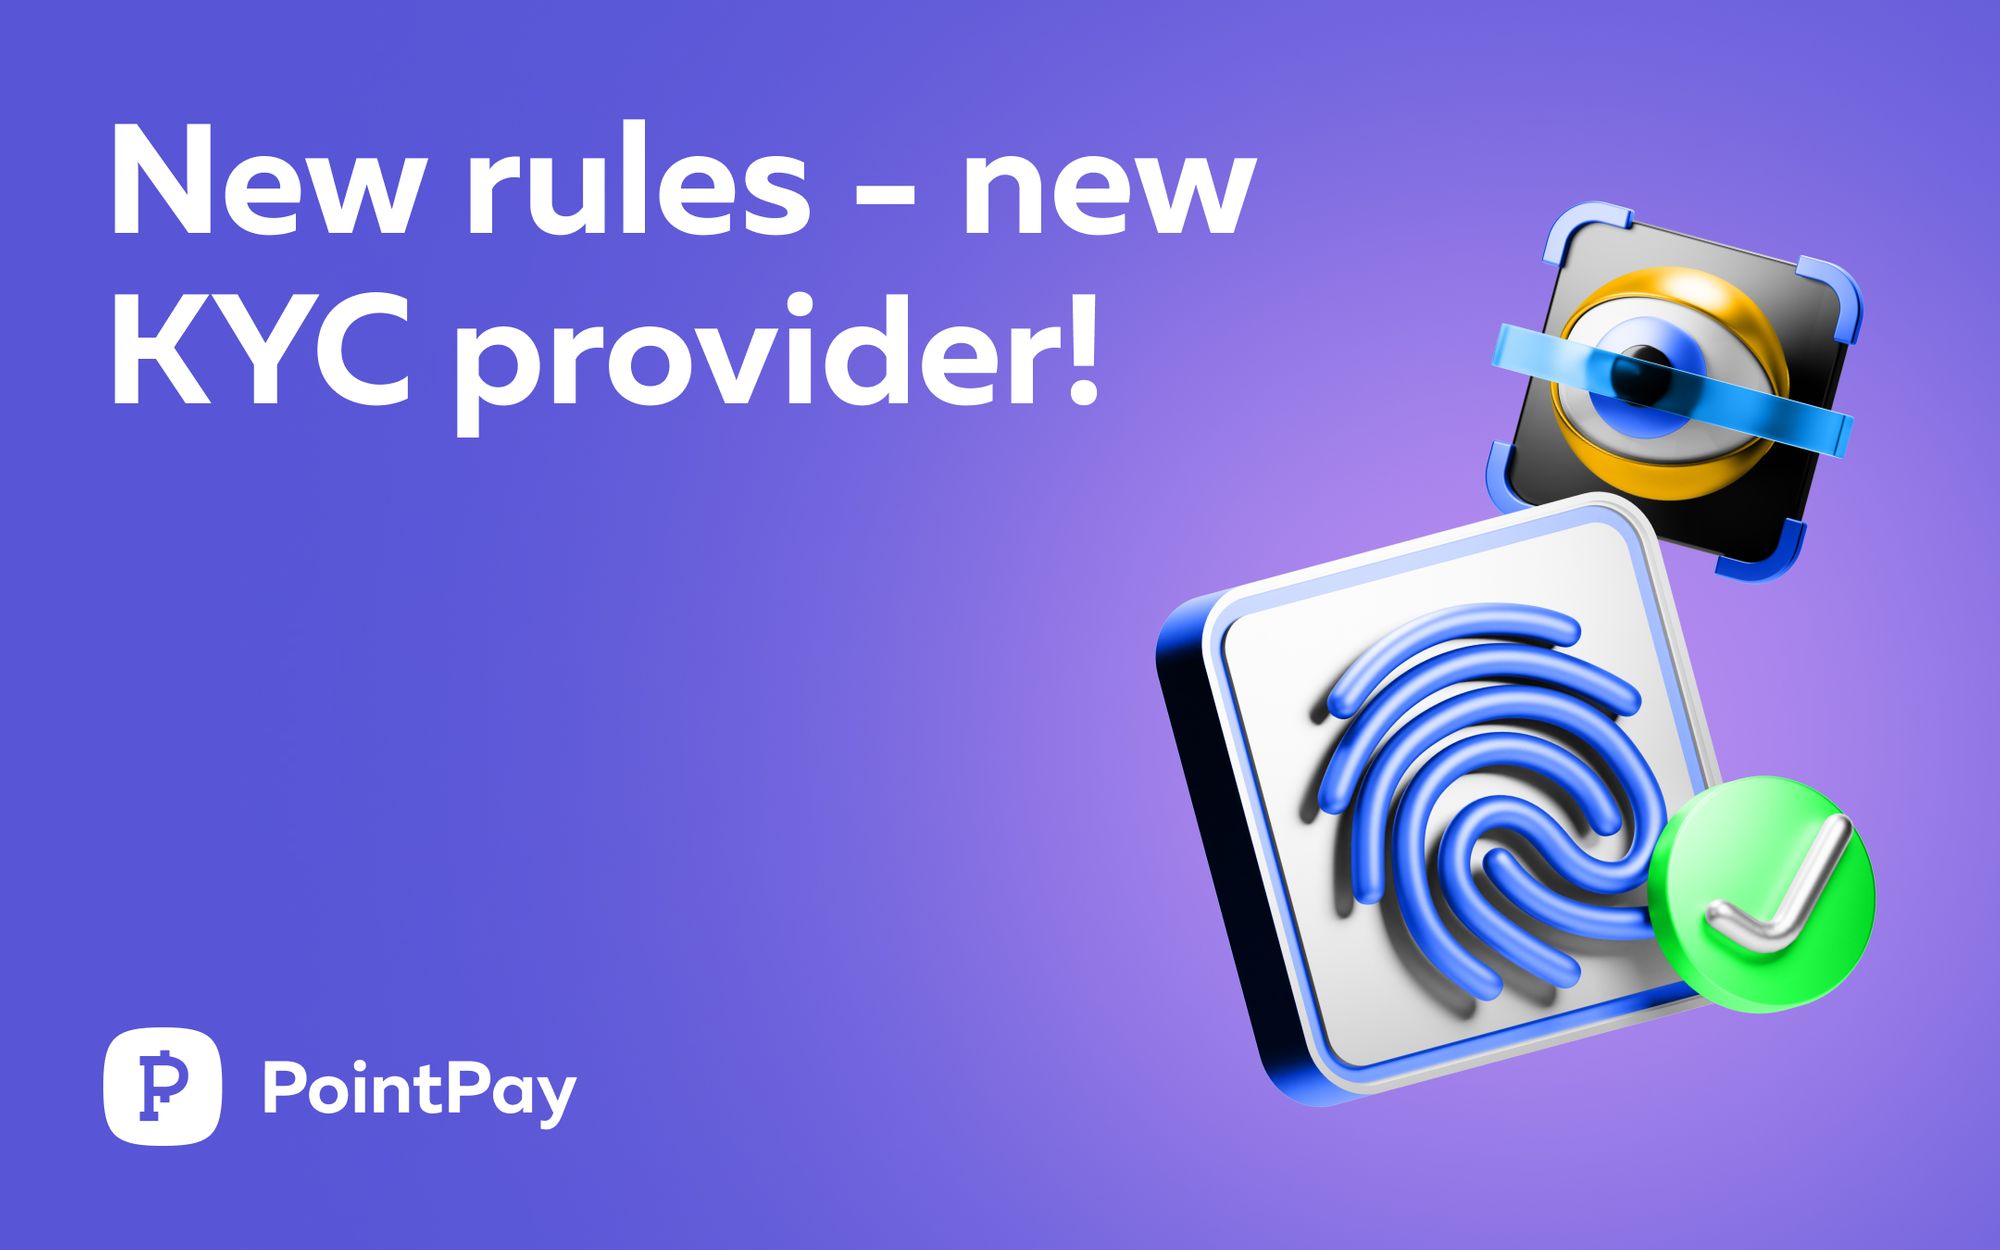 New rules - new KYC provider!